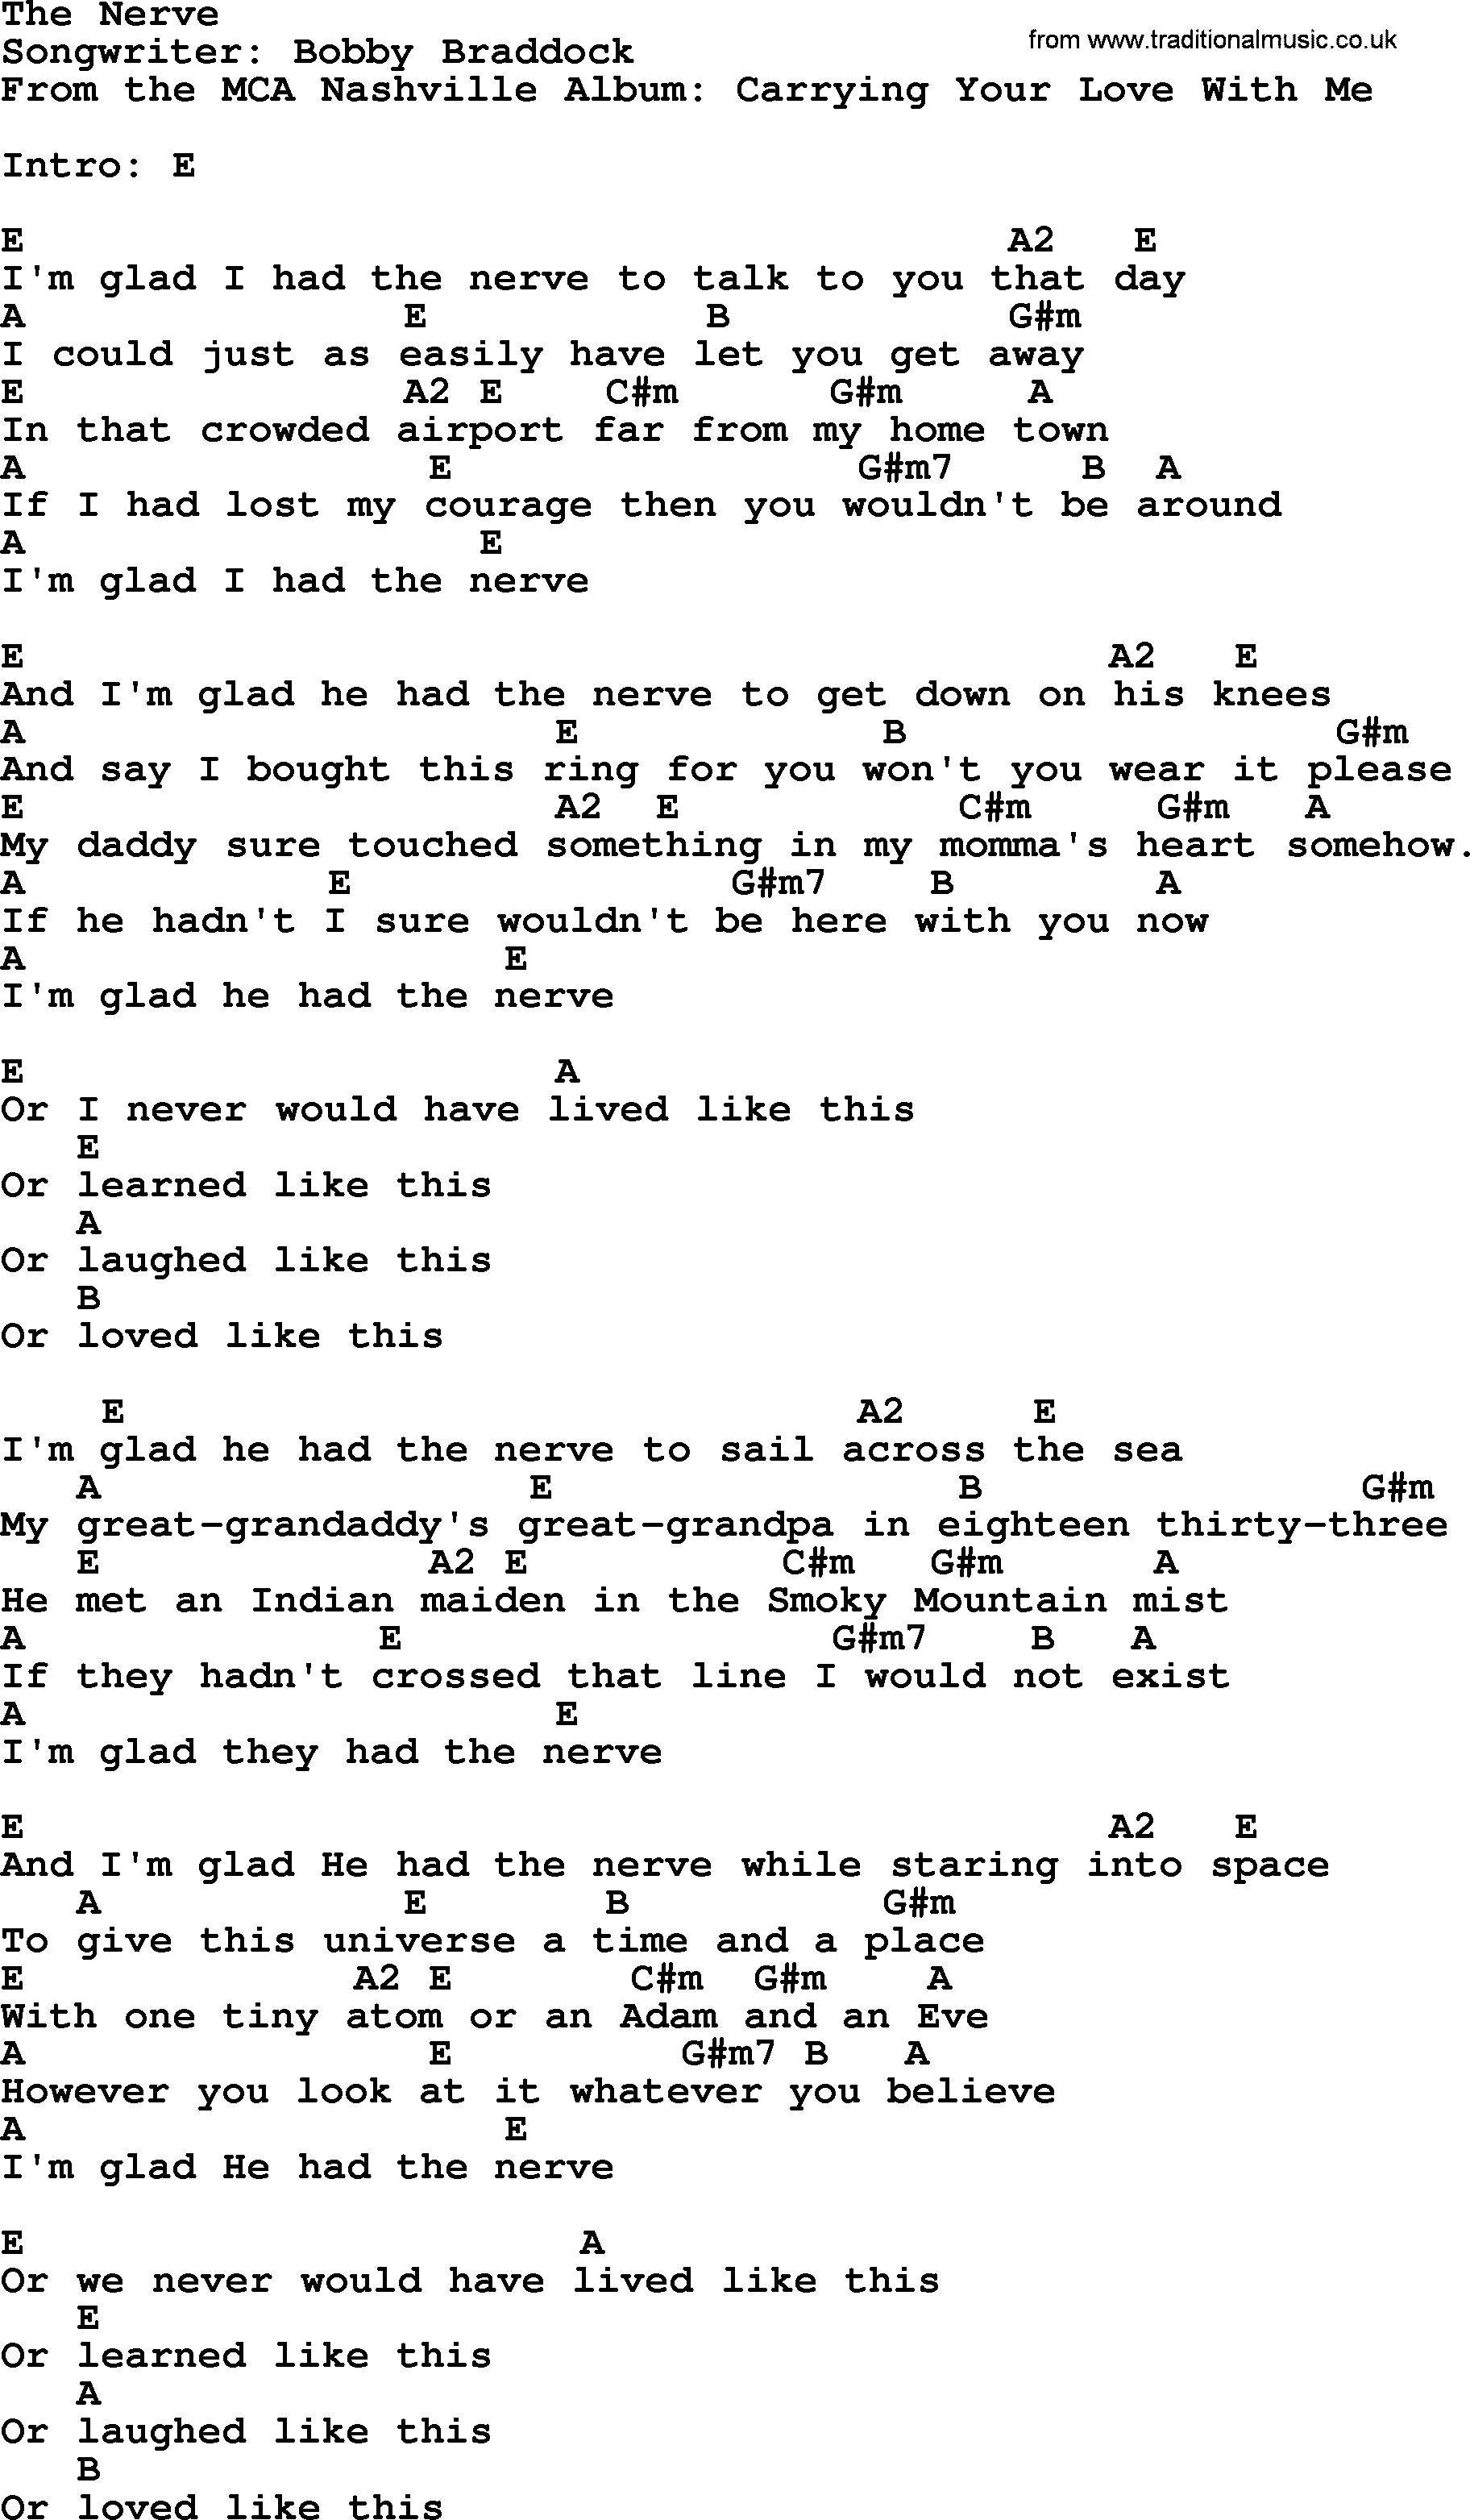 Across The Universe Chords The Nerve George Strait Lyrics And Chords